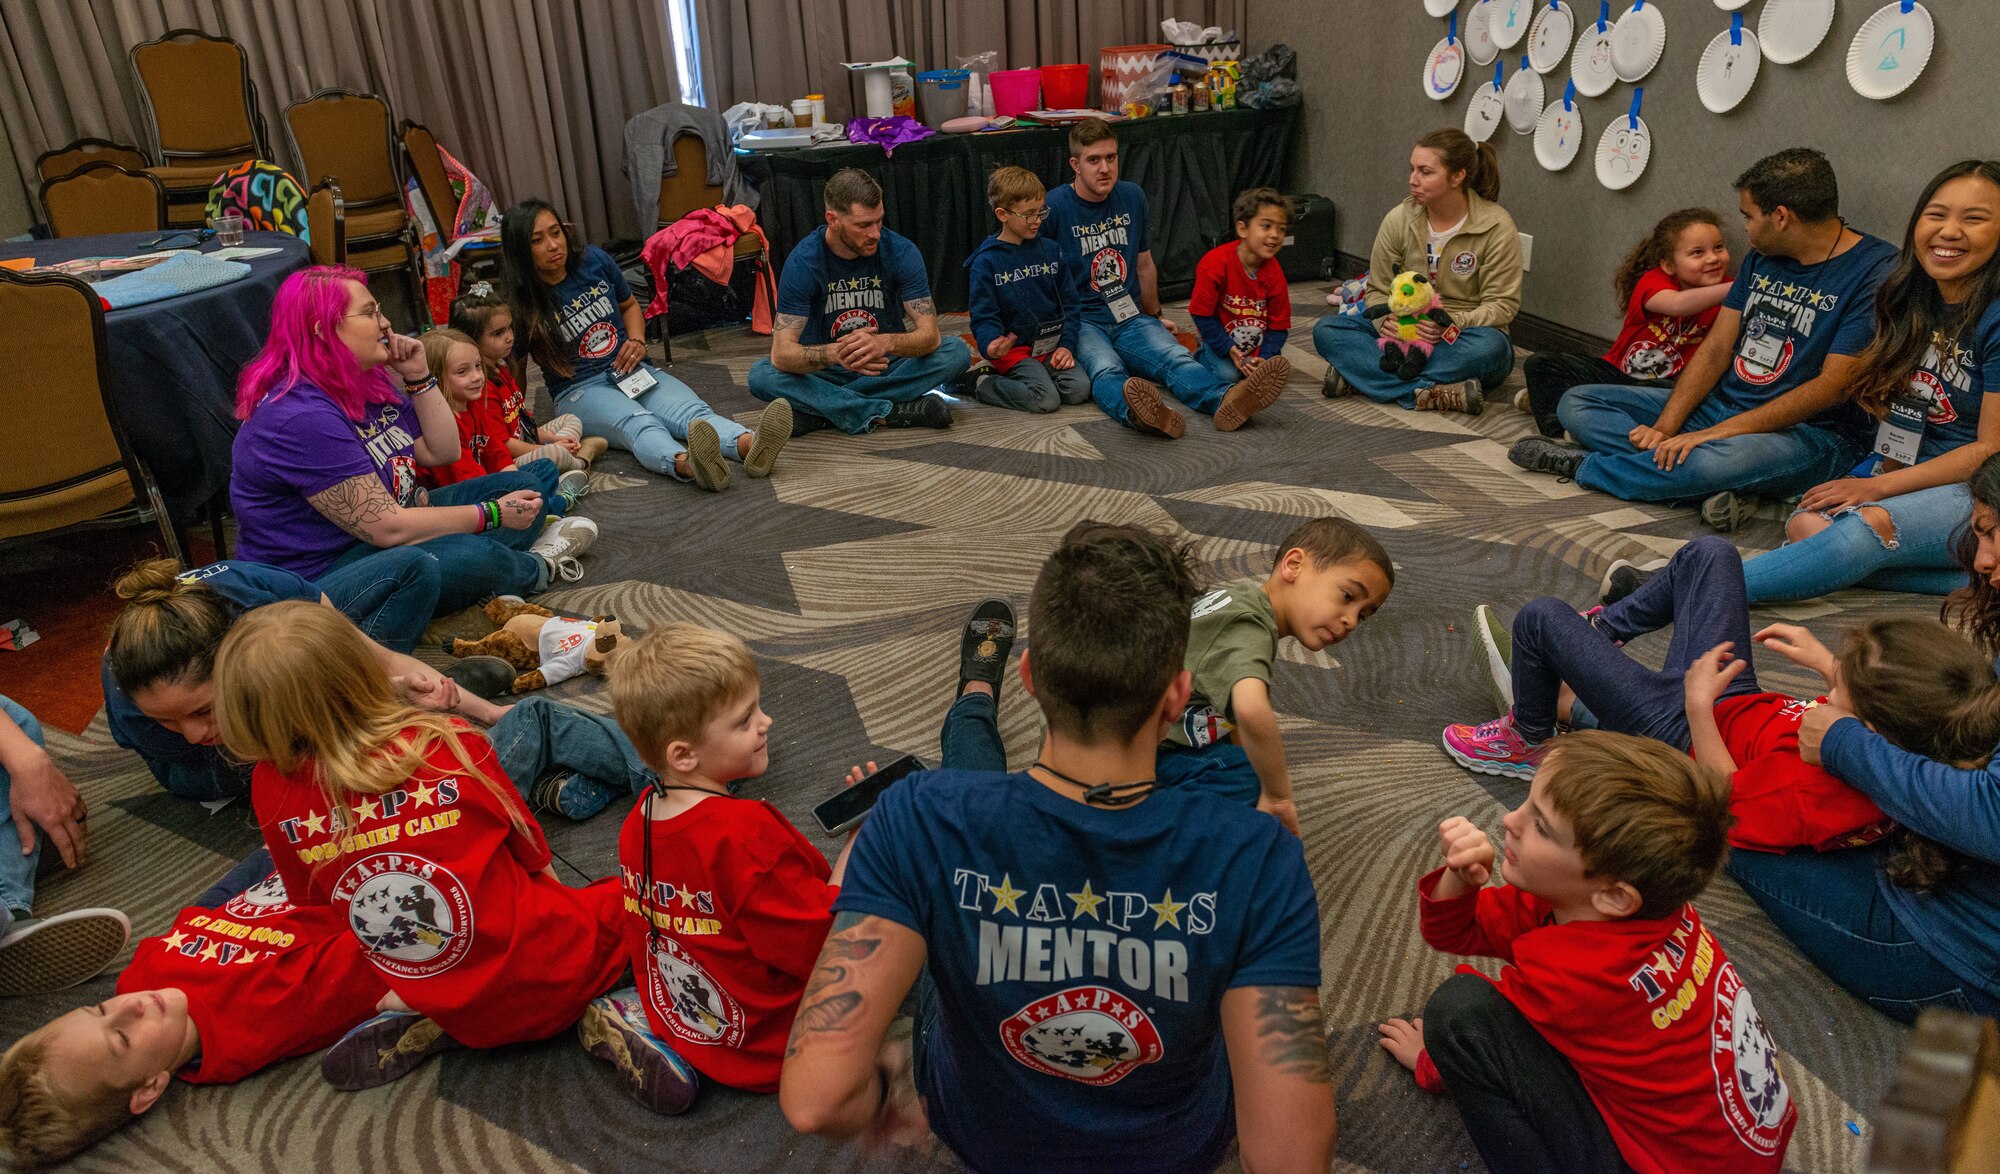 Tragedy Assistance Program for Survivors mentors and children engage each other during a bonding session at the TAPS mountain state regional military survivor seminar, Colorado Springs, Colorado, April 2, 2019. TAPS provides comfort and hope through peer support networks and connecting the bereaved to grief resources such as Good Grief Camps at no cost to the family of the fallen. Since 1994, TAPS has assisted more than 85,000 surviving families, casualty officers and caregivers. (U.S. Air Force courtesy photo)